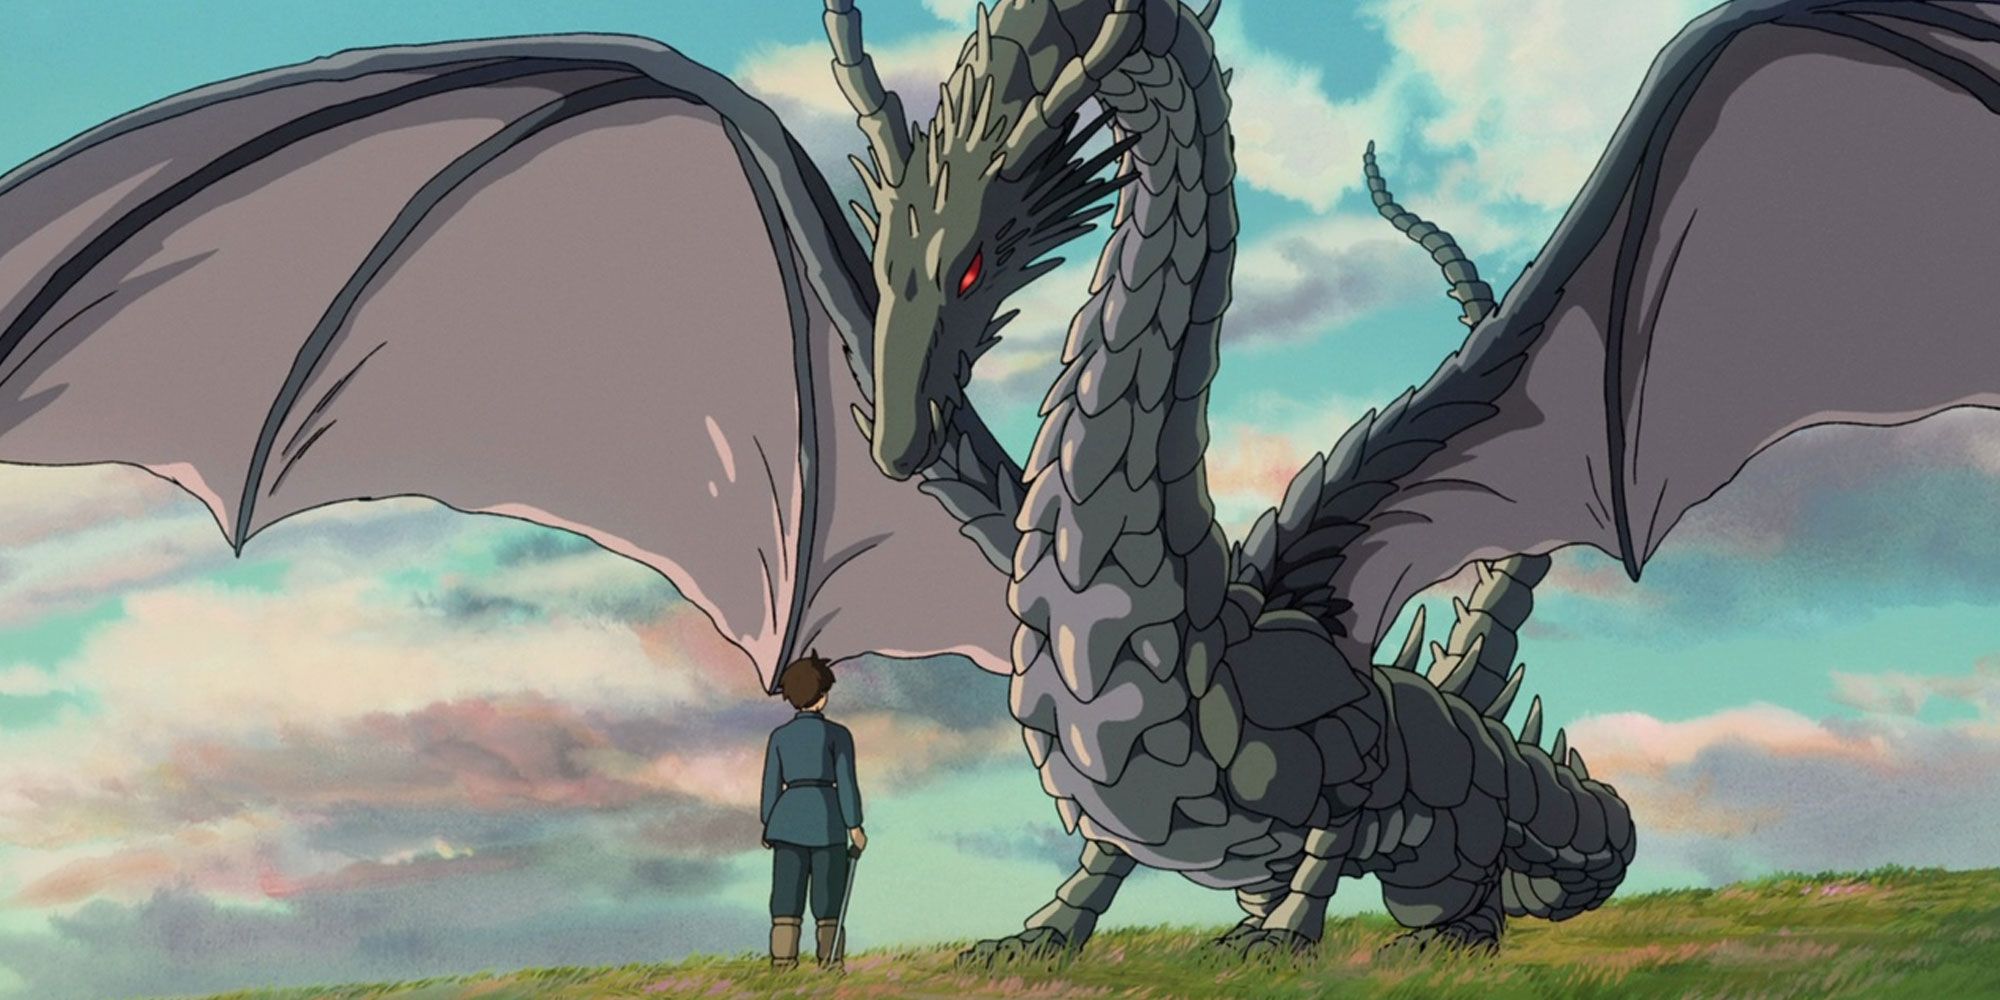 The dragon looms over a boy in Tales From Earthsea